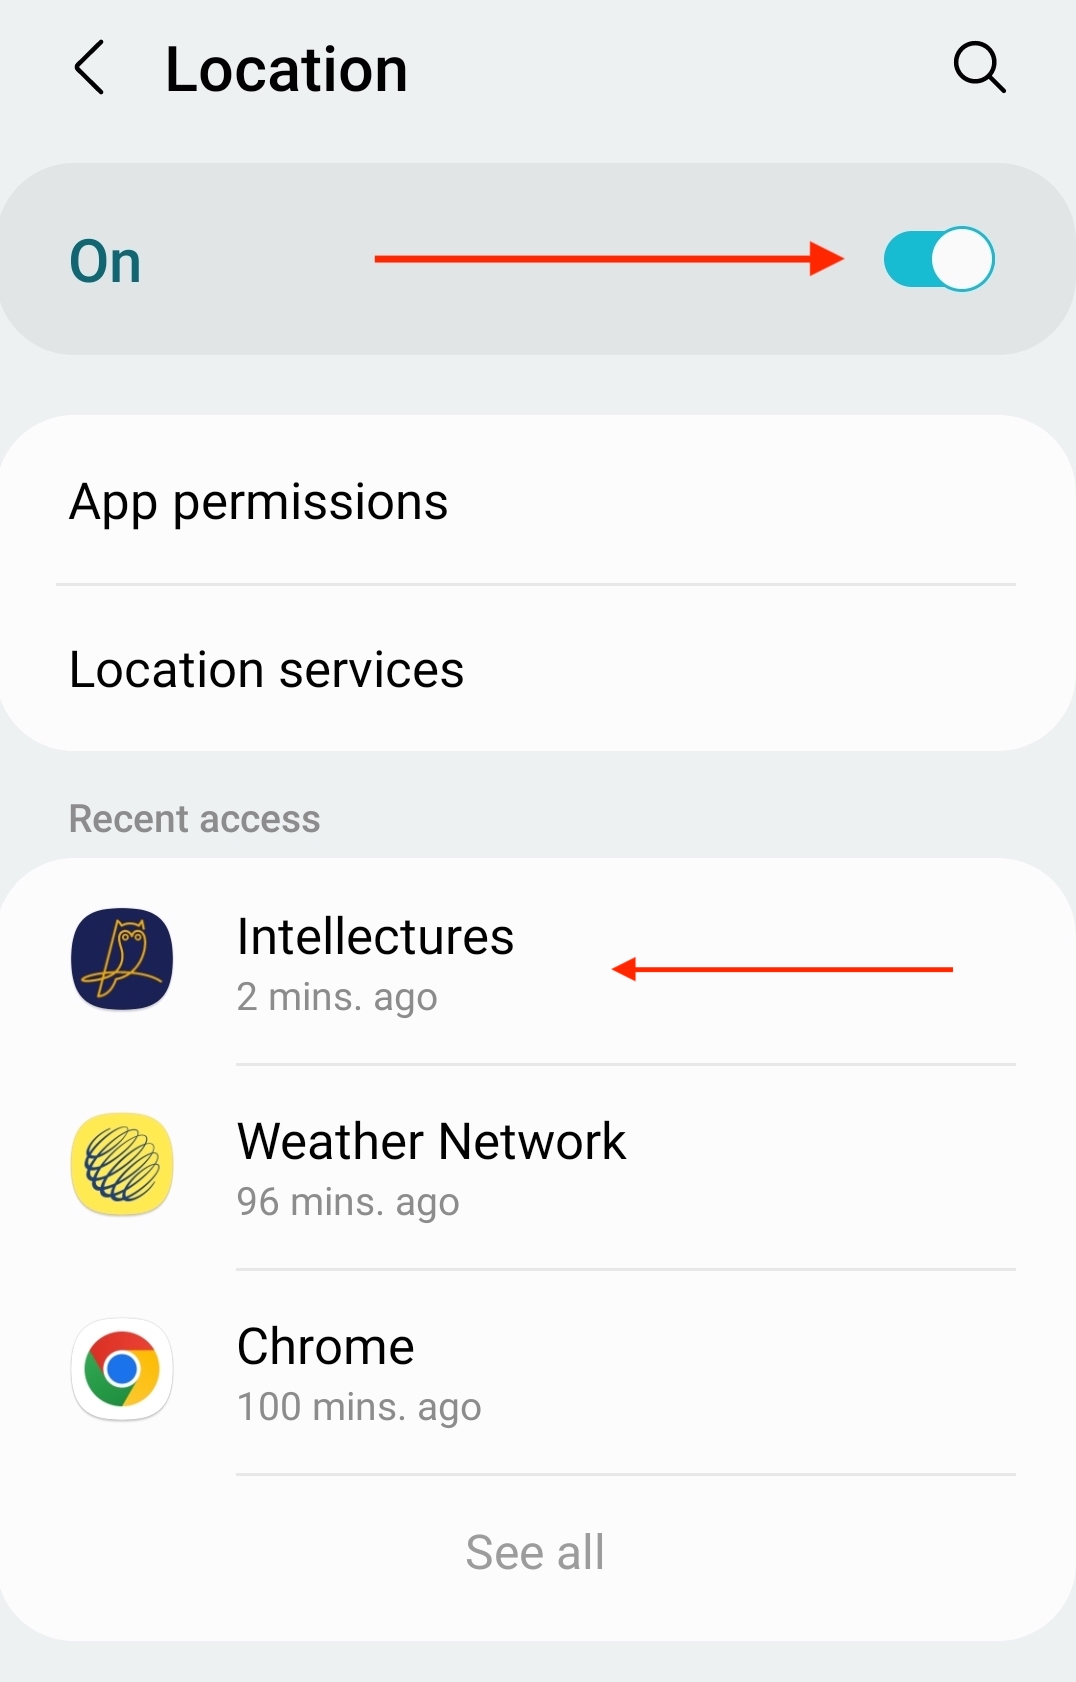 Android-Intelecures-allow-location-sharing